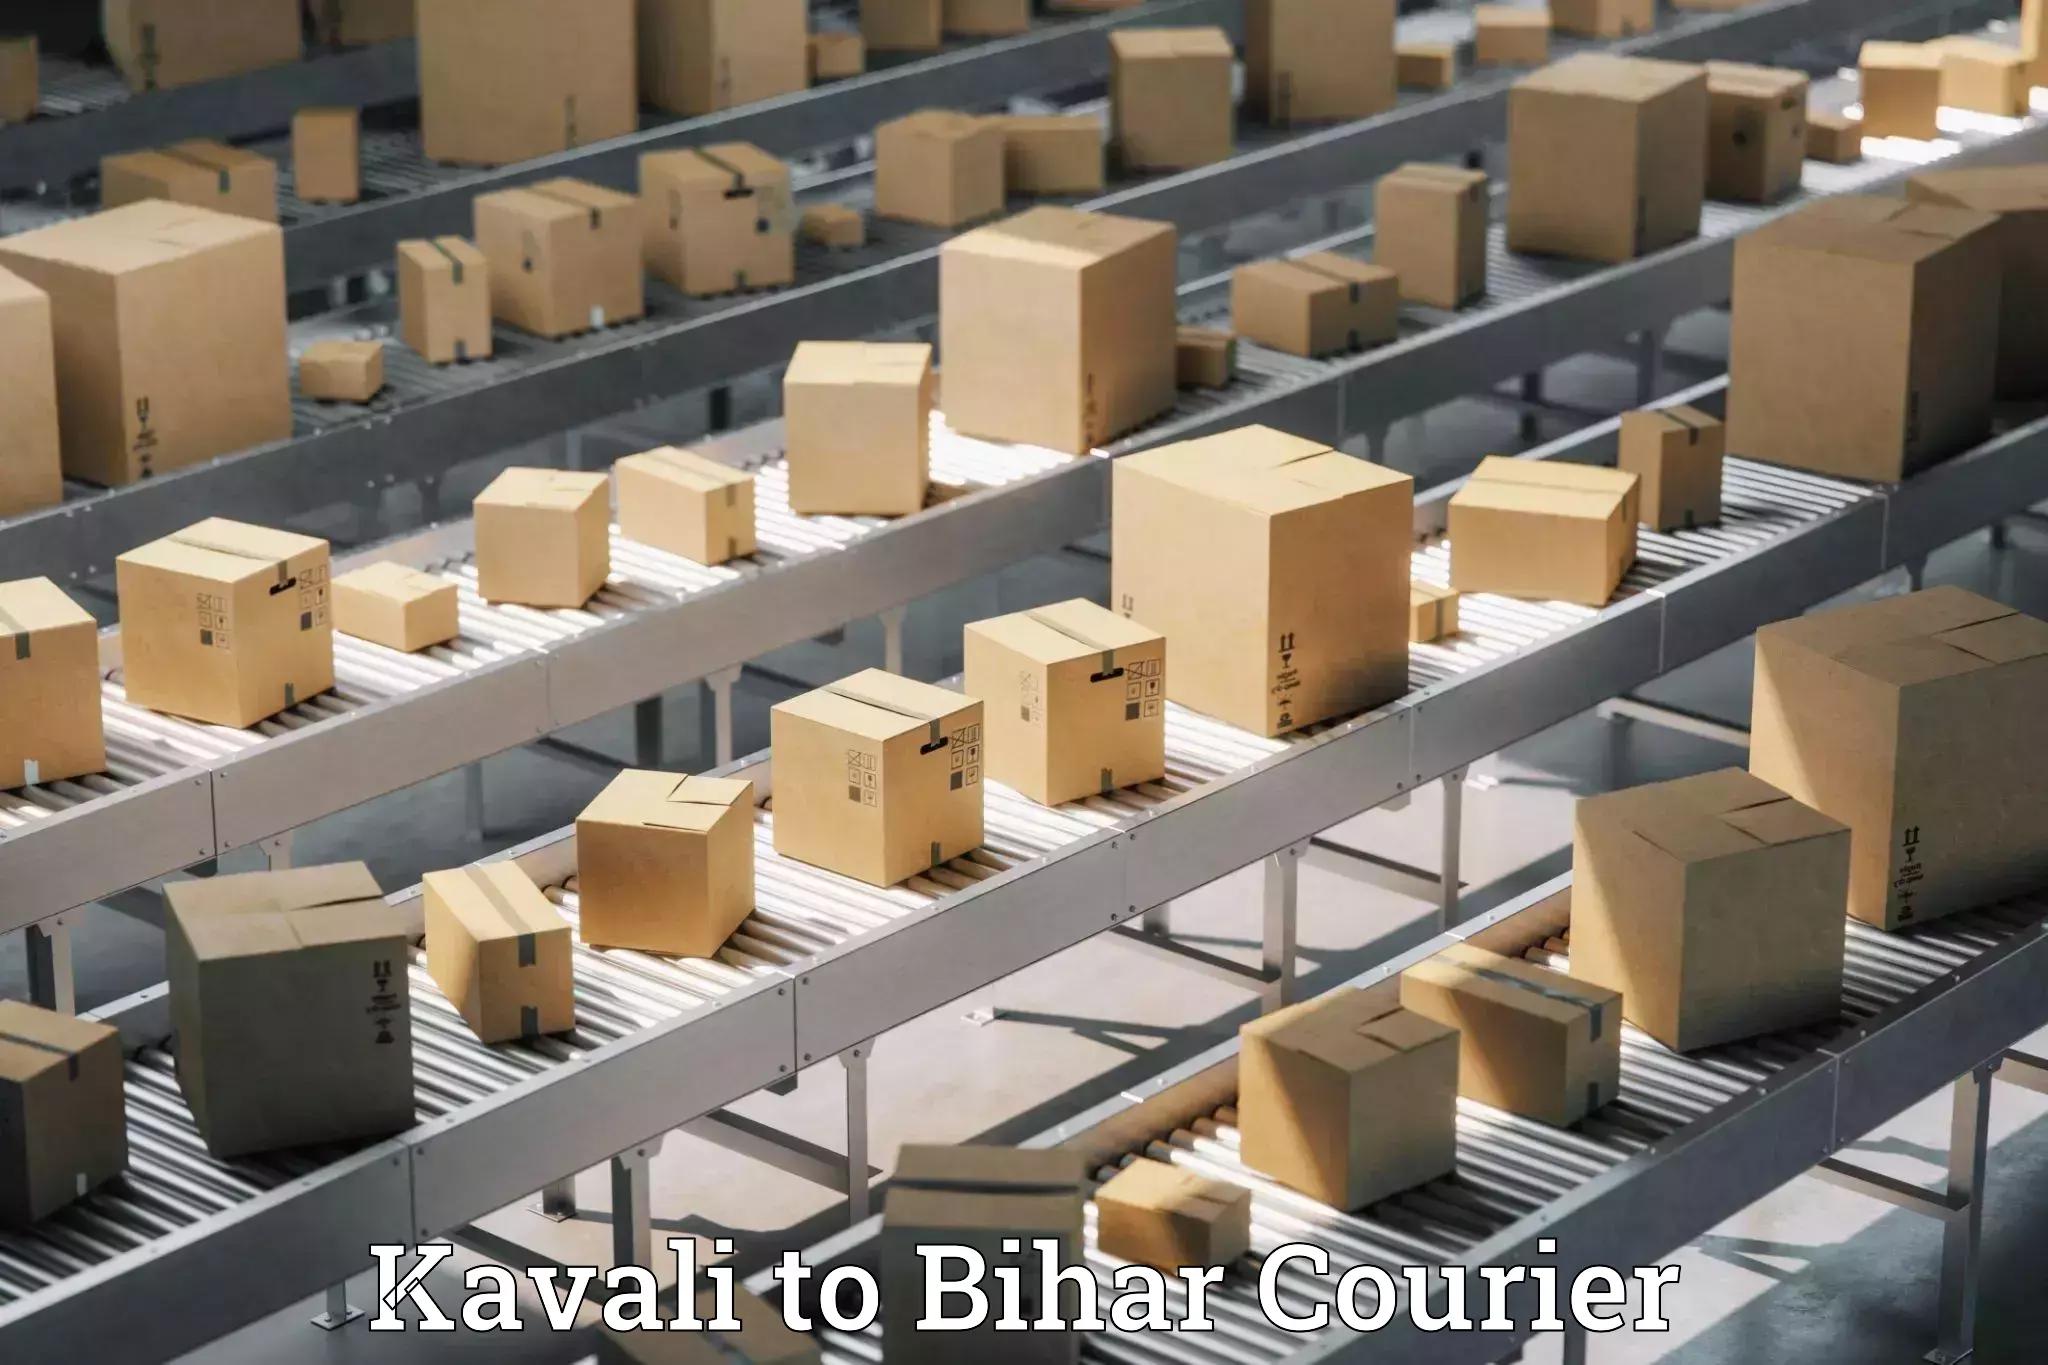 Large-scale shipping solutions Kavali to Kamtaul